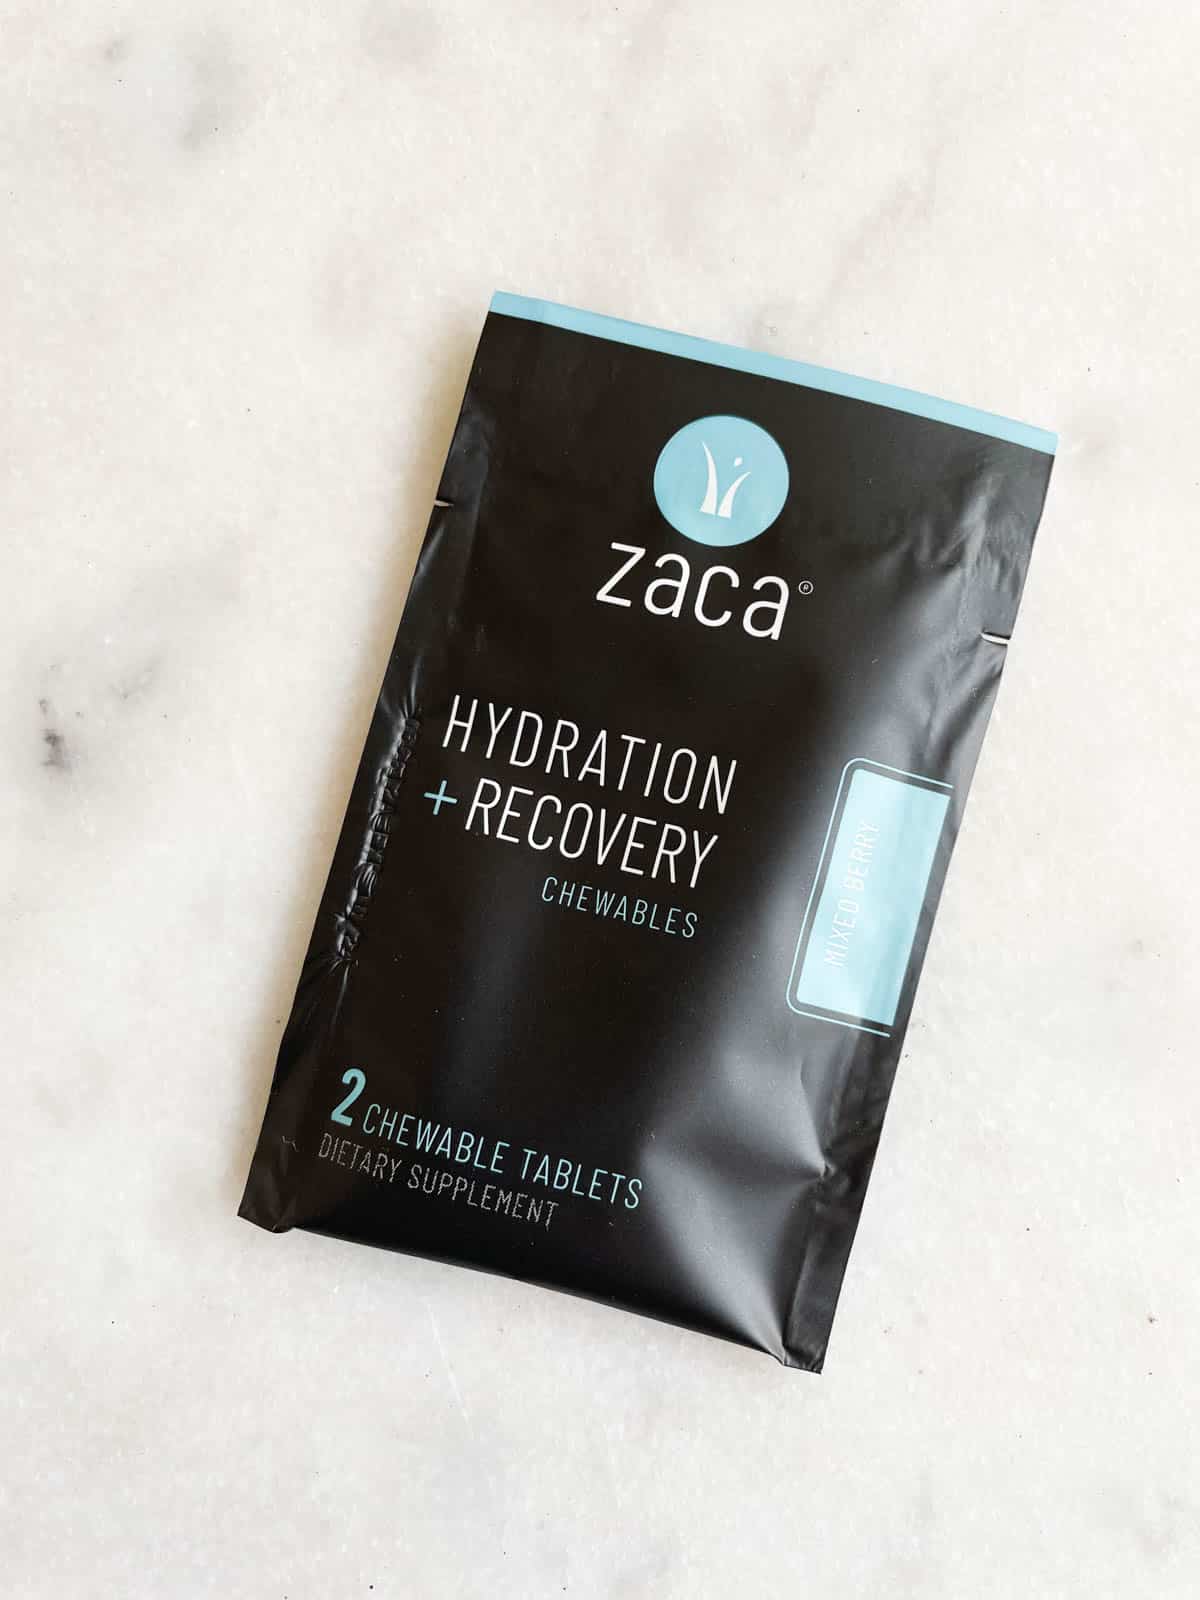 A packet of Zaca chewable tablets for hydration and recovery.